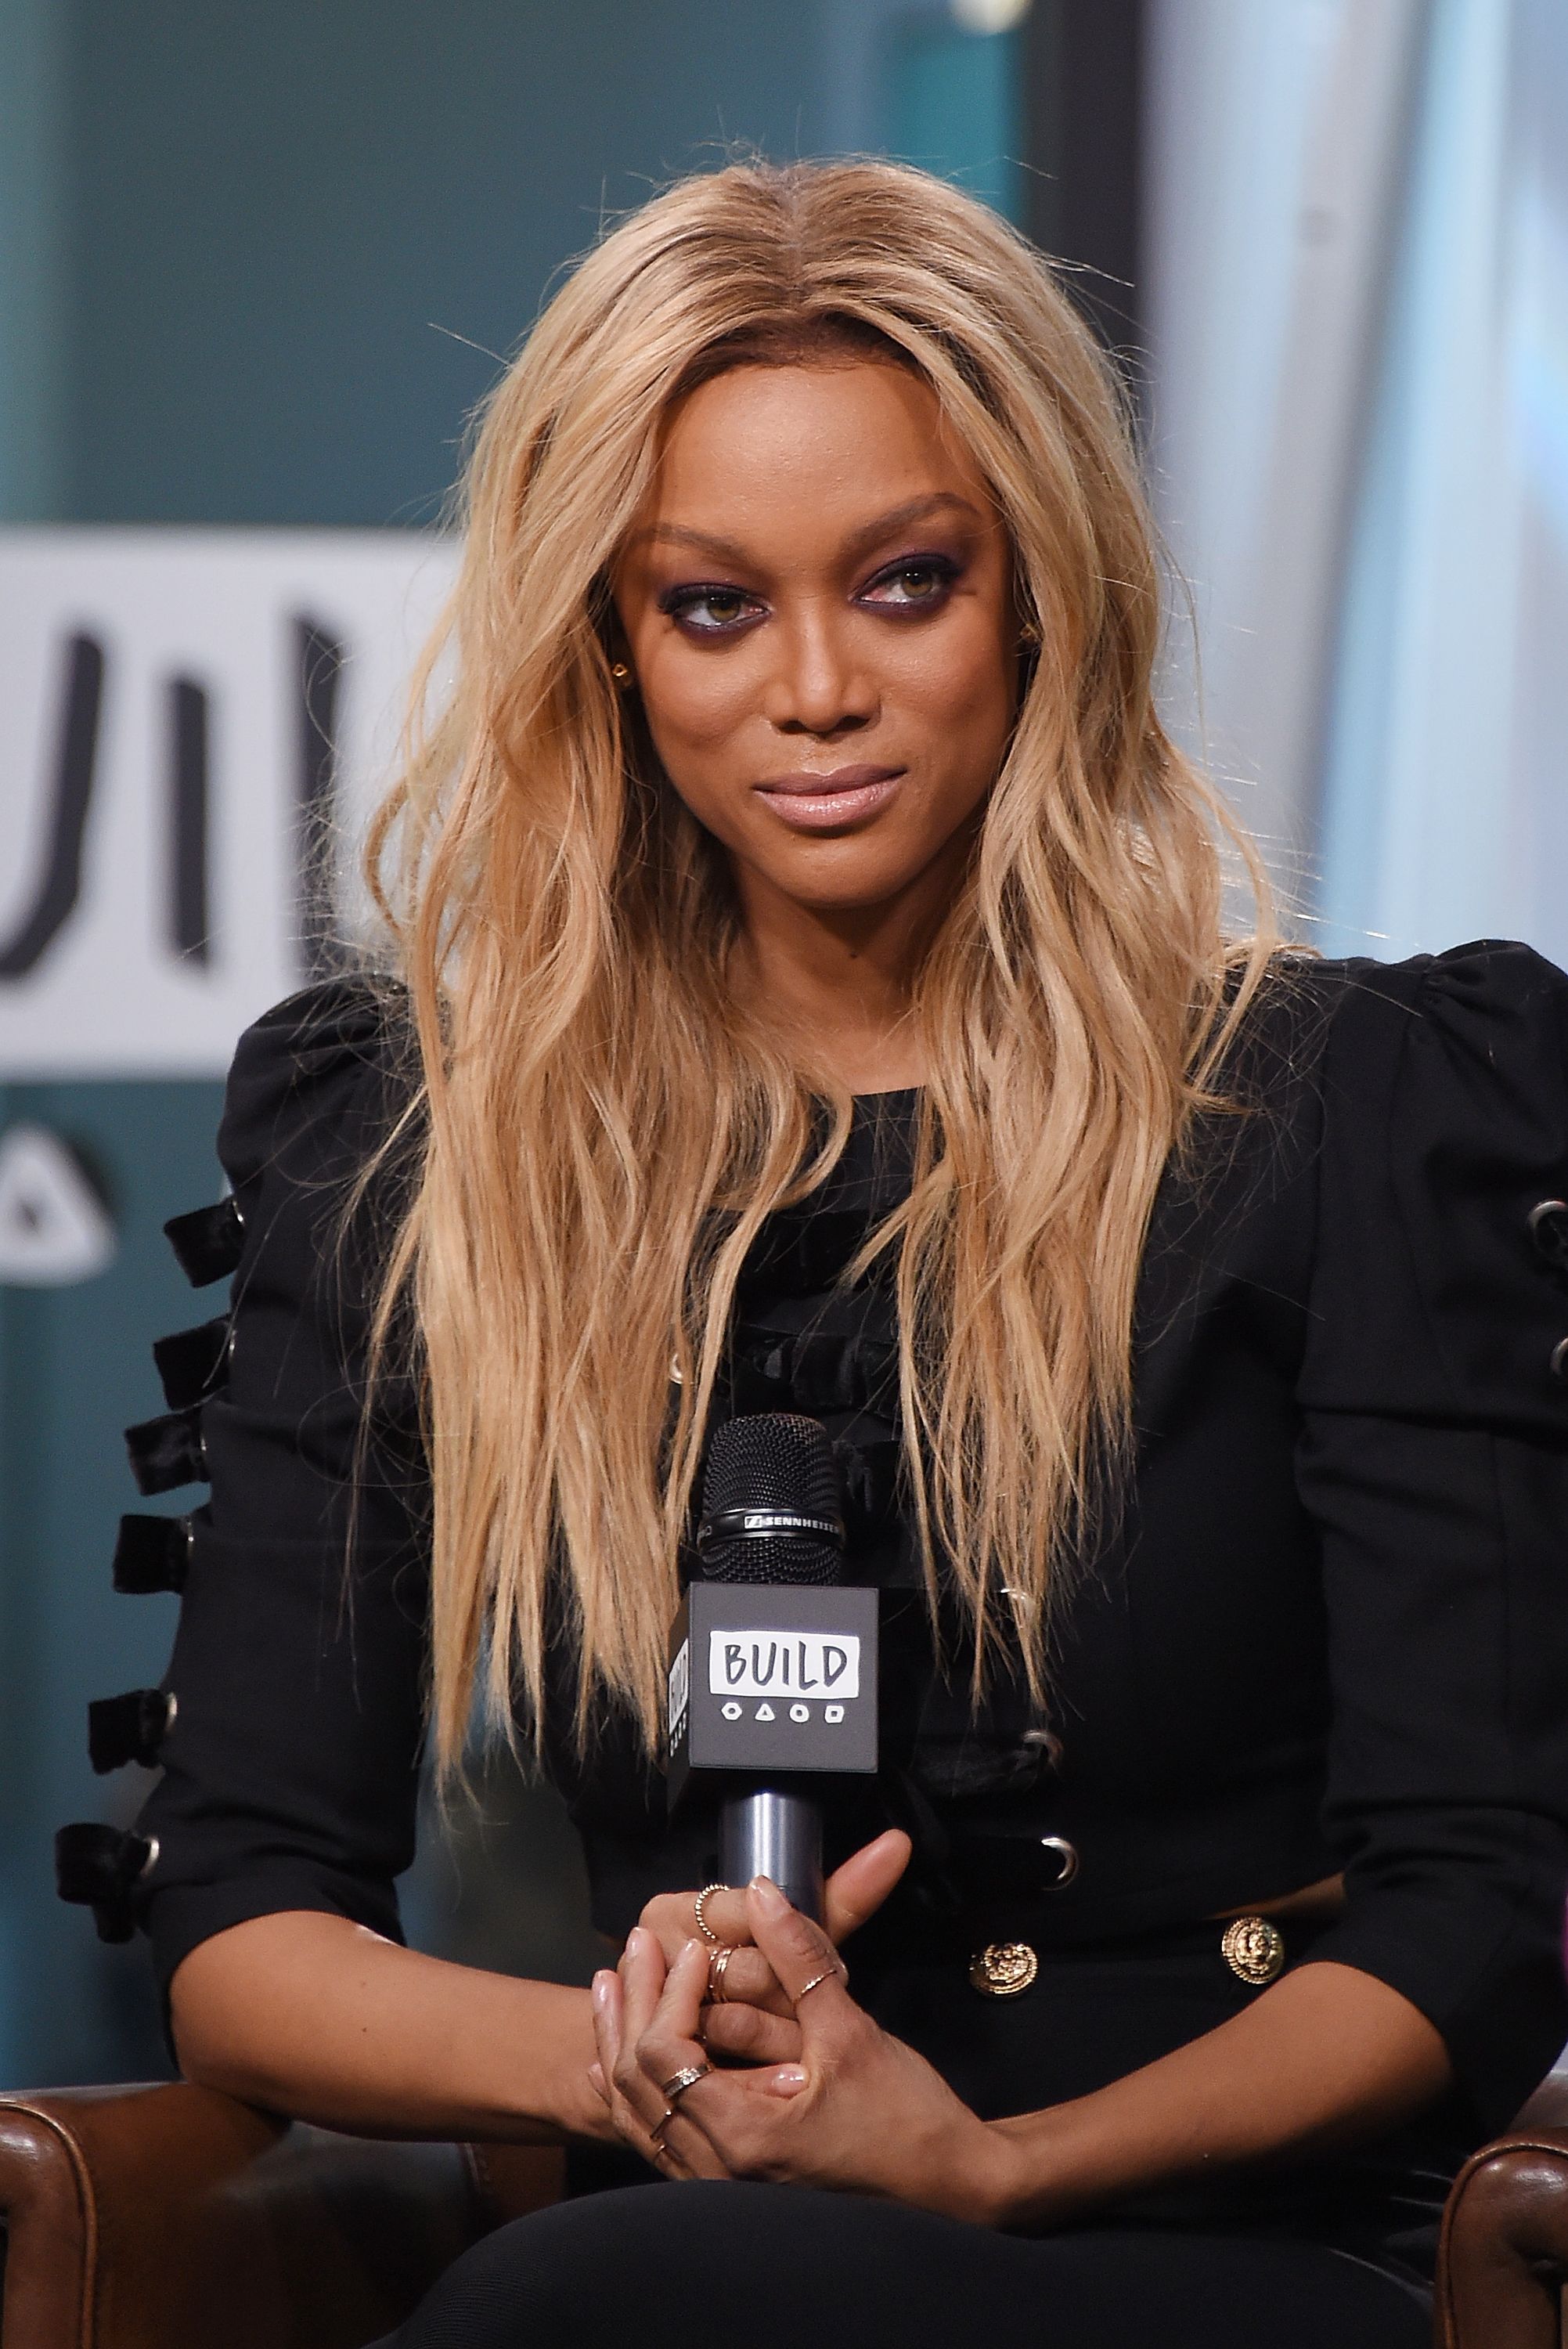 Tyra Banks at the Build Studio to discuss the show "America's Next Top Model" at Build Studio on January 9, 2018. | Photo: Getty Images